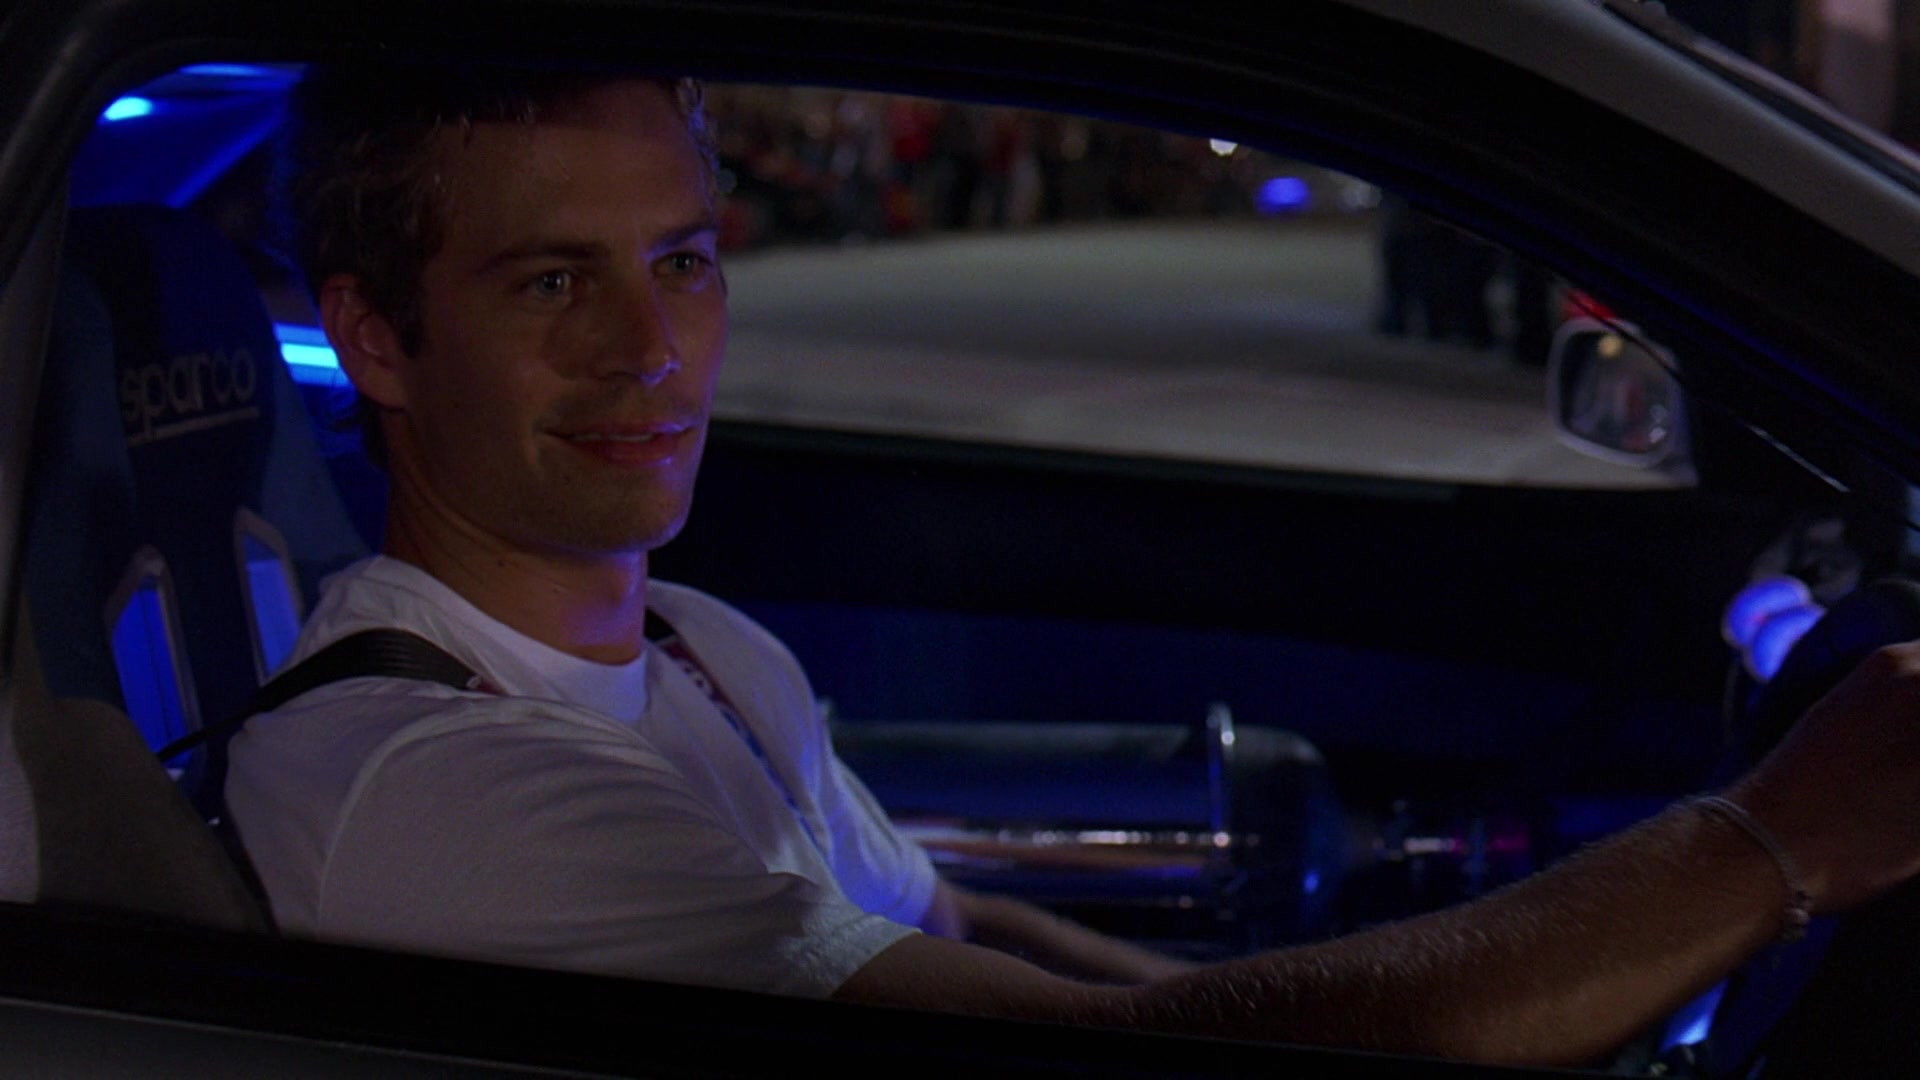 what car did brian drive in fast and furious 2